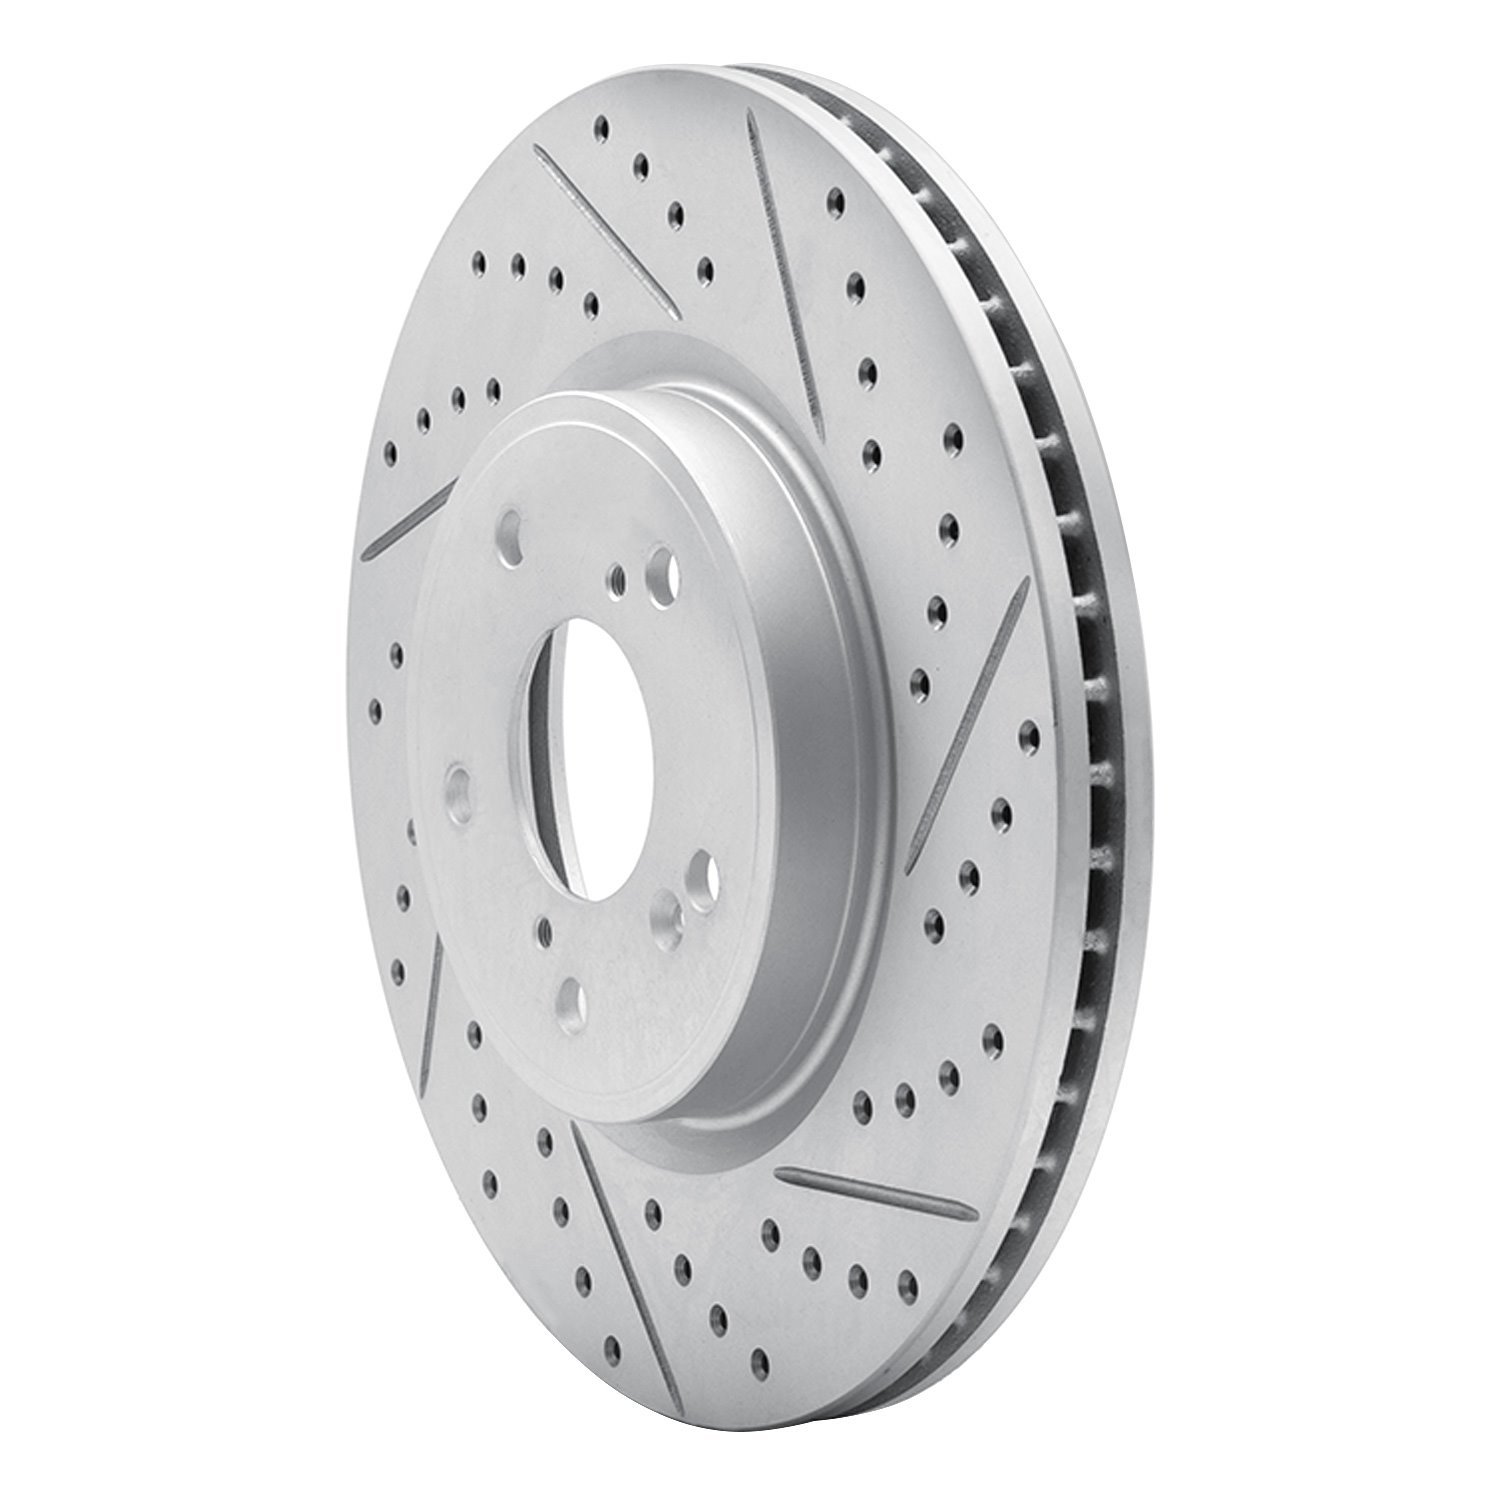 830-59064R Geoperformance Drilled/Slotted Brake Rotor, Fits Select Acura/Honda, Position: Front Right